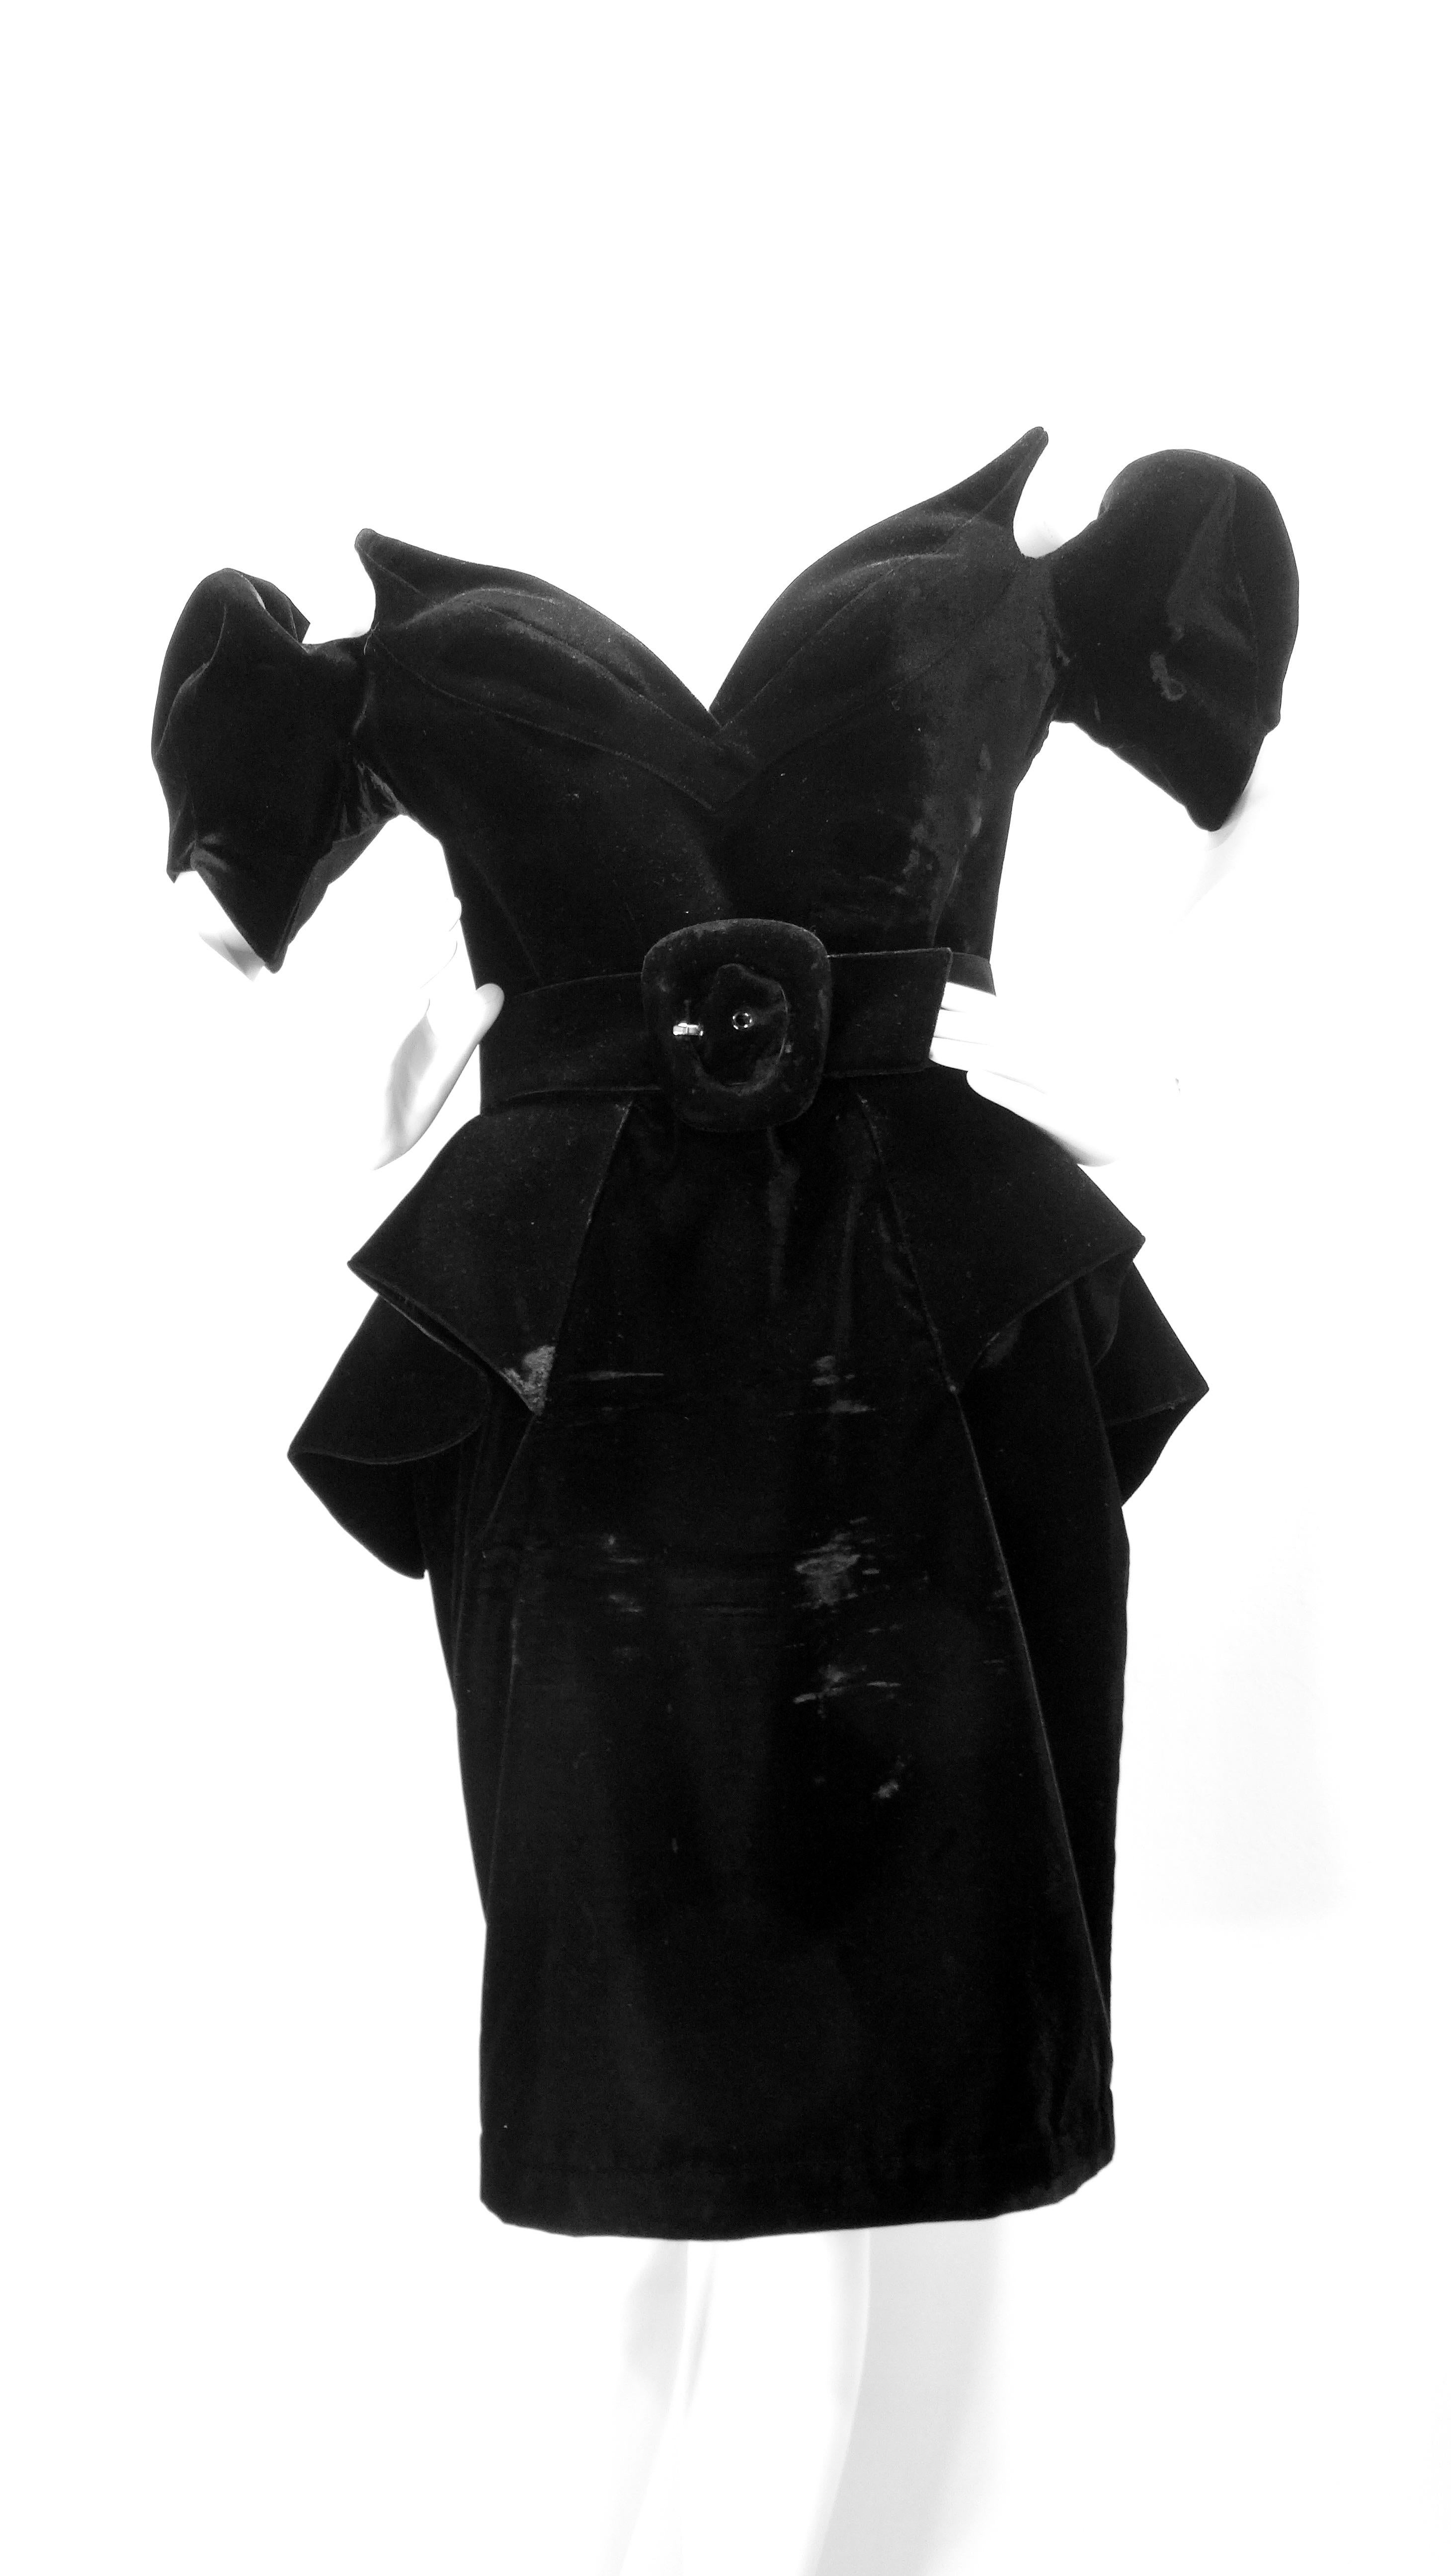 This is a historic dress by none other than the iconic Thierry Mugler! This is a Haute Couture black velvet dress known as the 